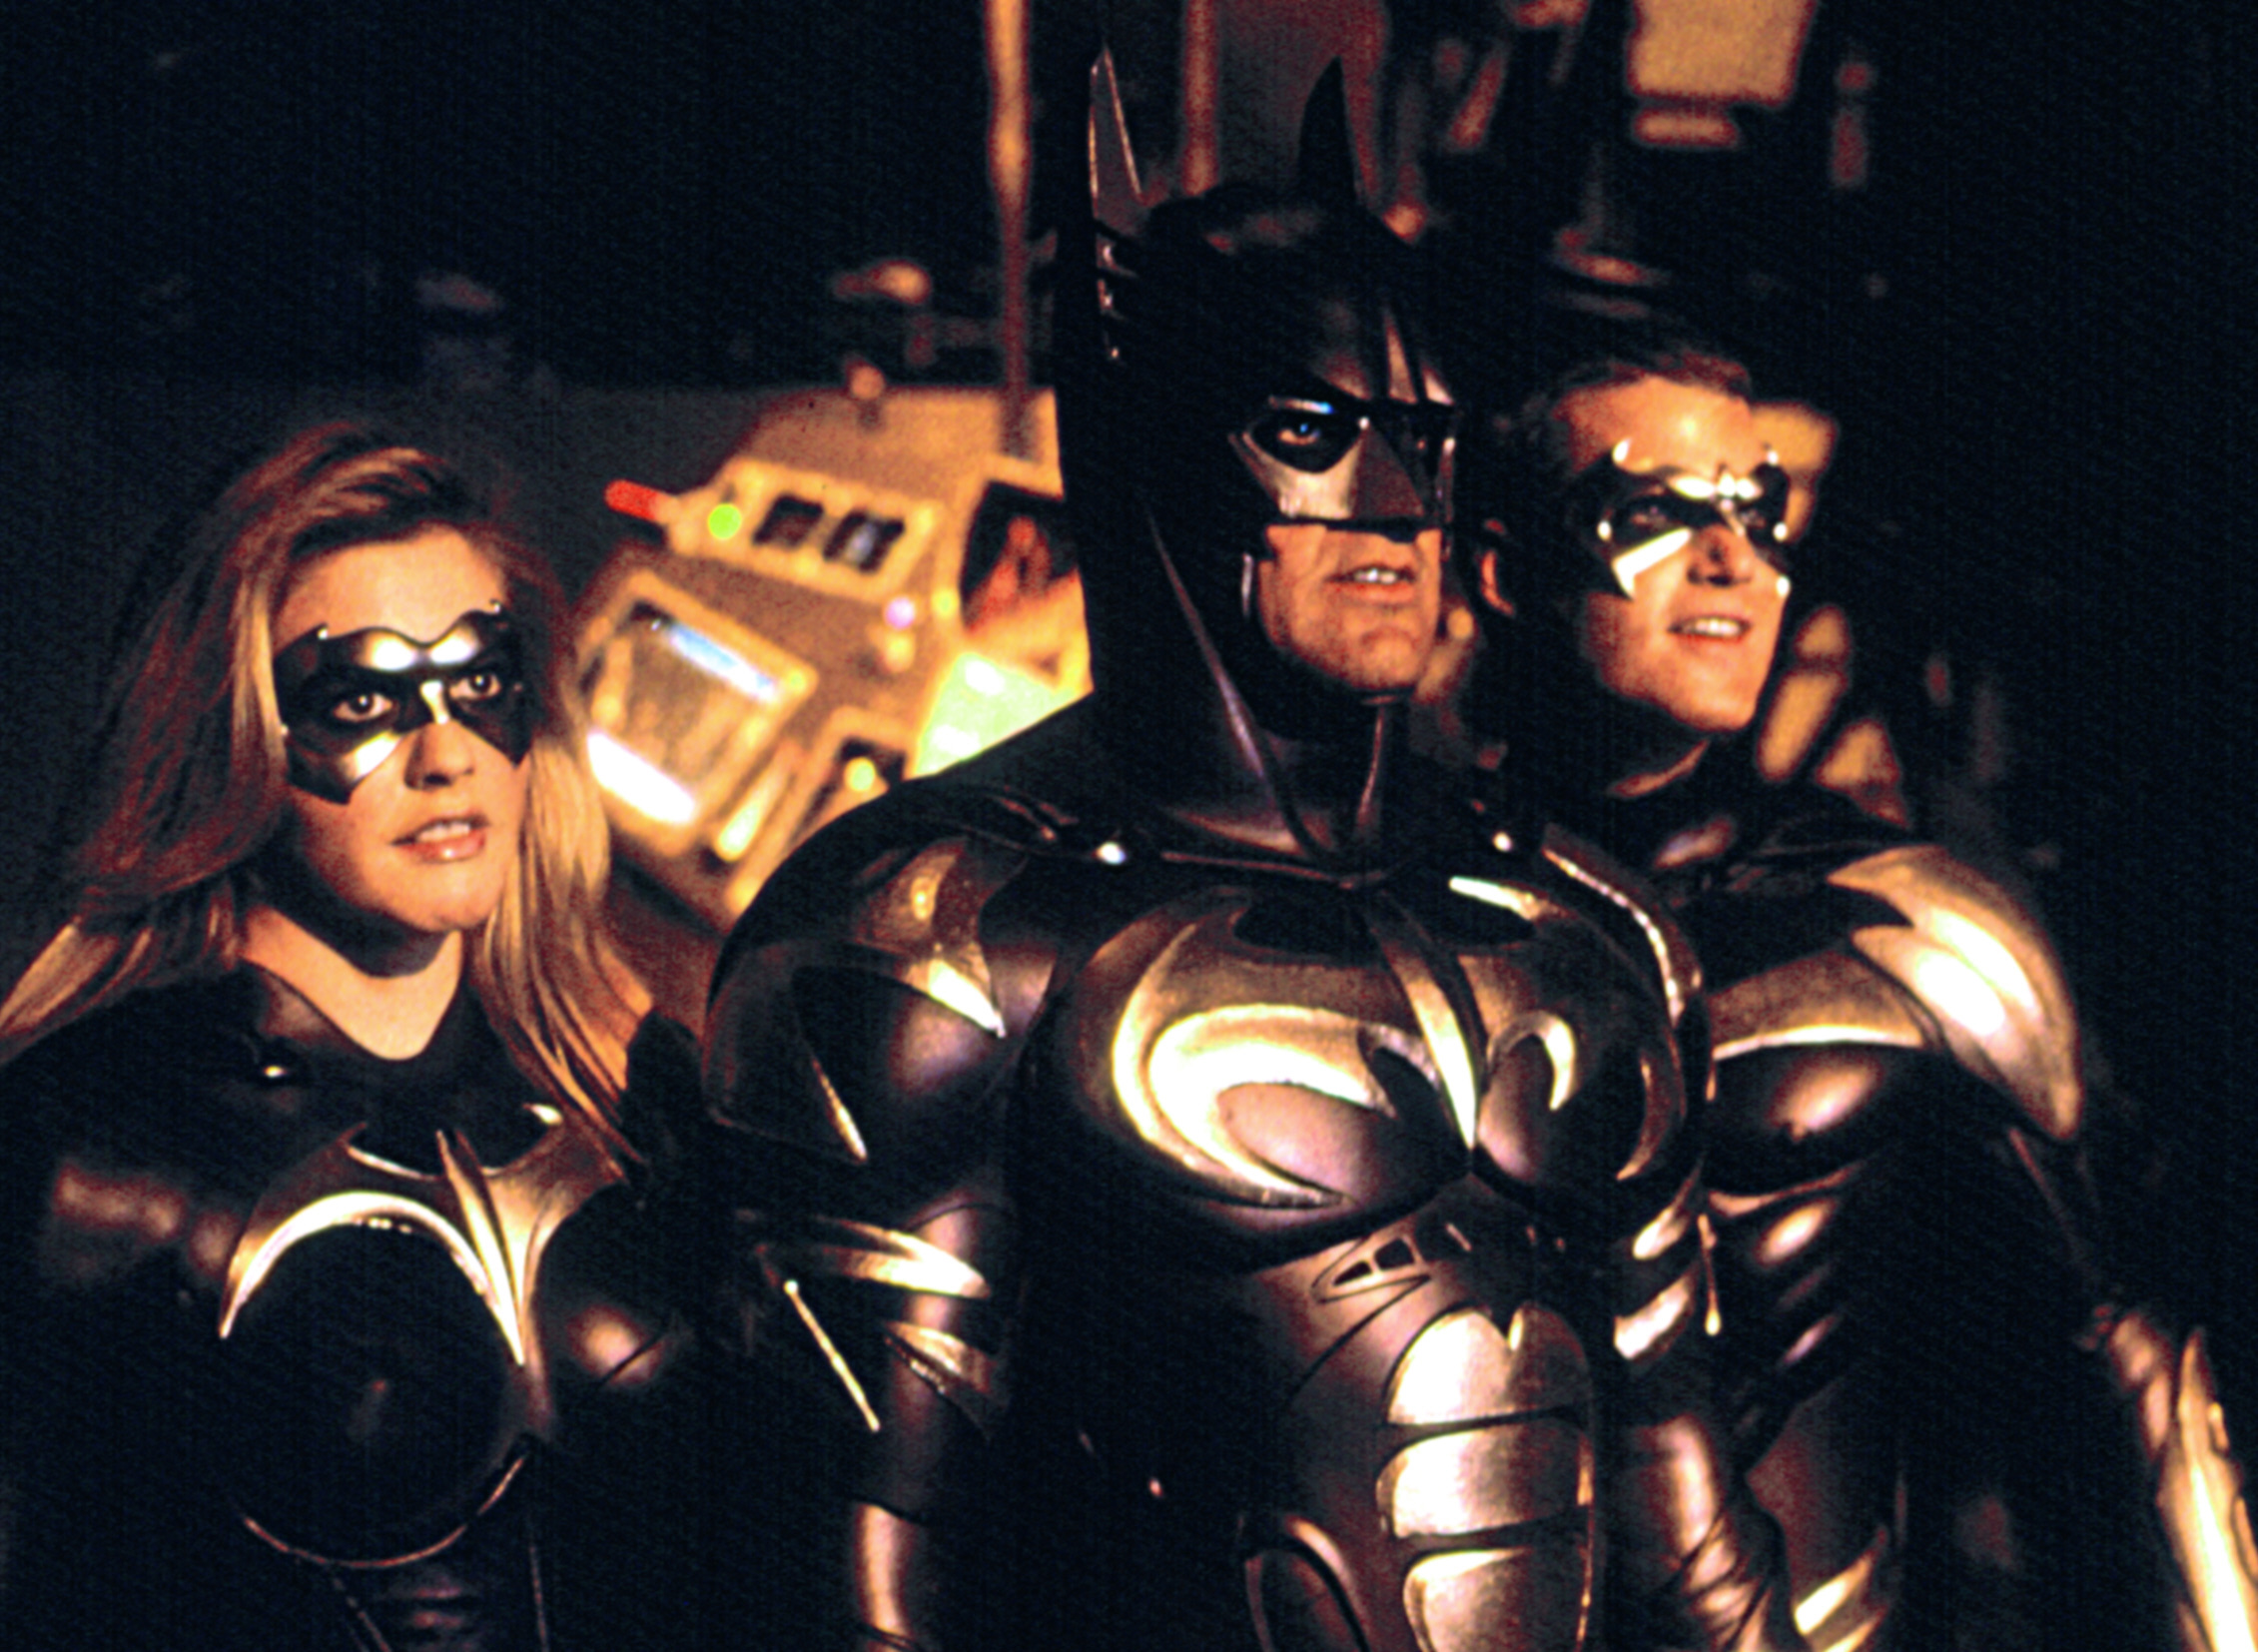 BATMAN AND ROBIN, Alicia Silverstone, George Clooney, Chris O'Donnell, 1997, (c)Warner Bros./courtesy Everett Collection